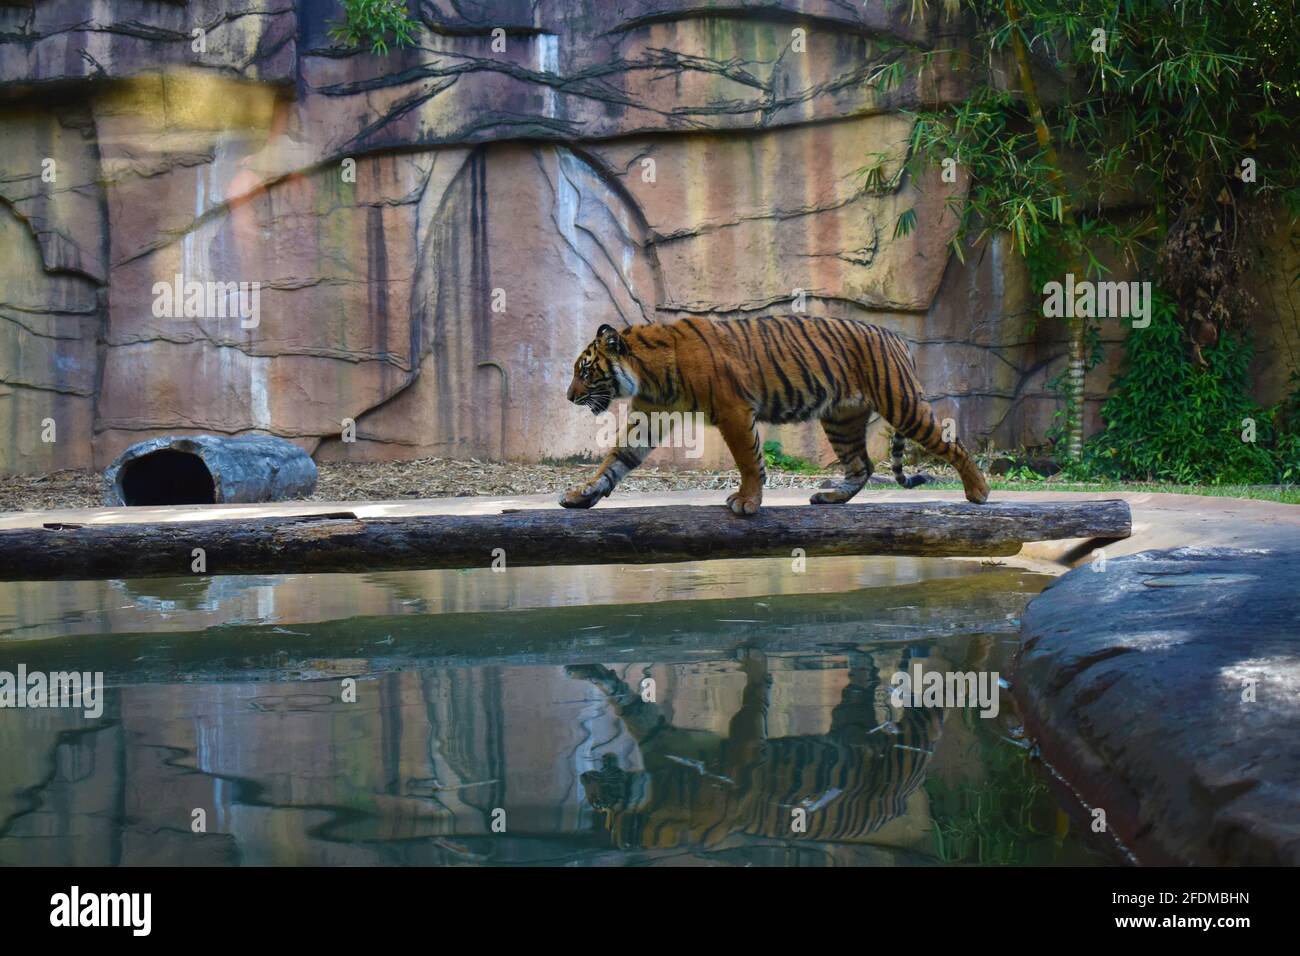 Tiger crossing water on Stem Stock Photo